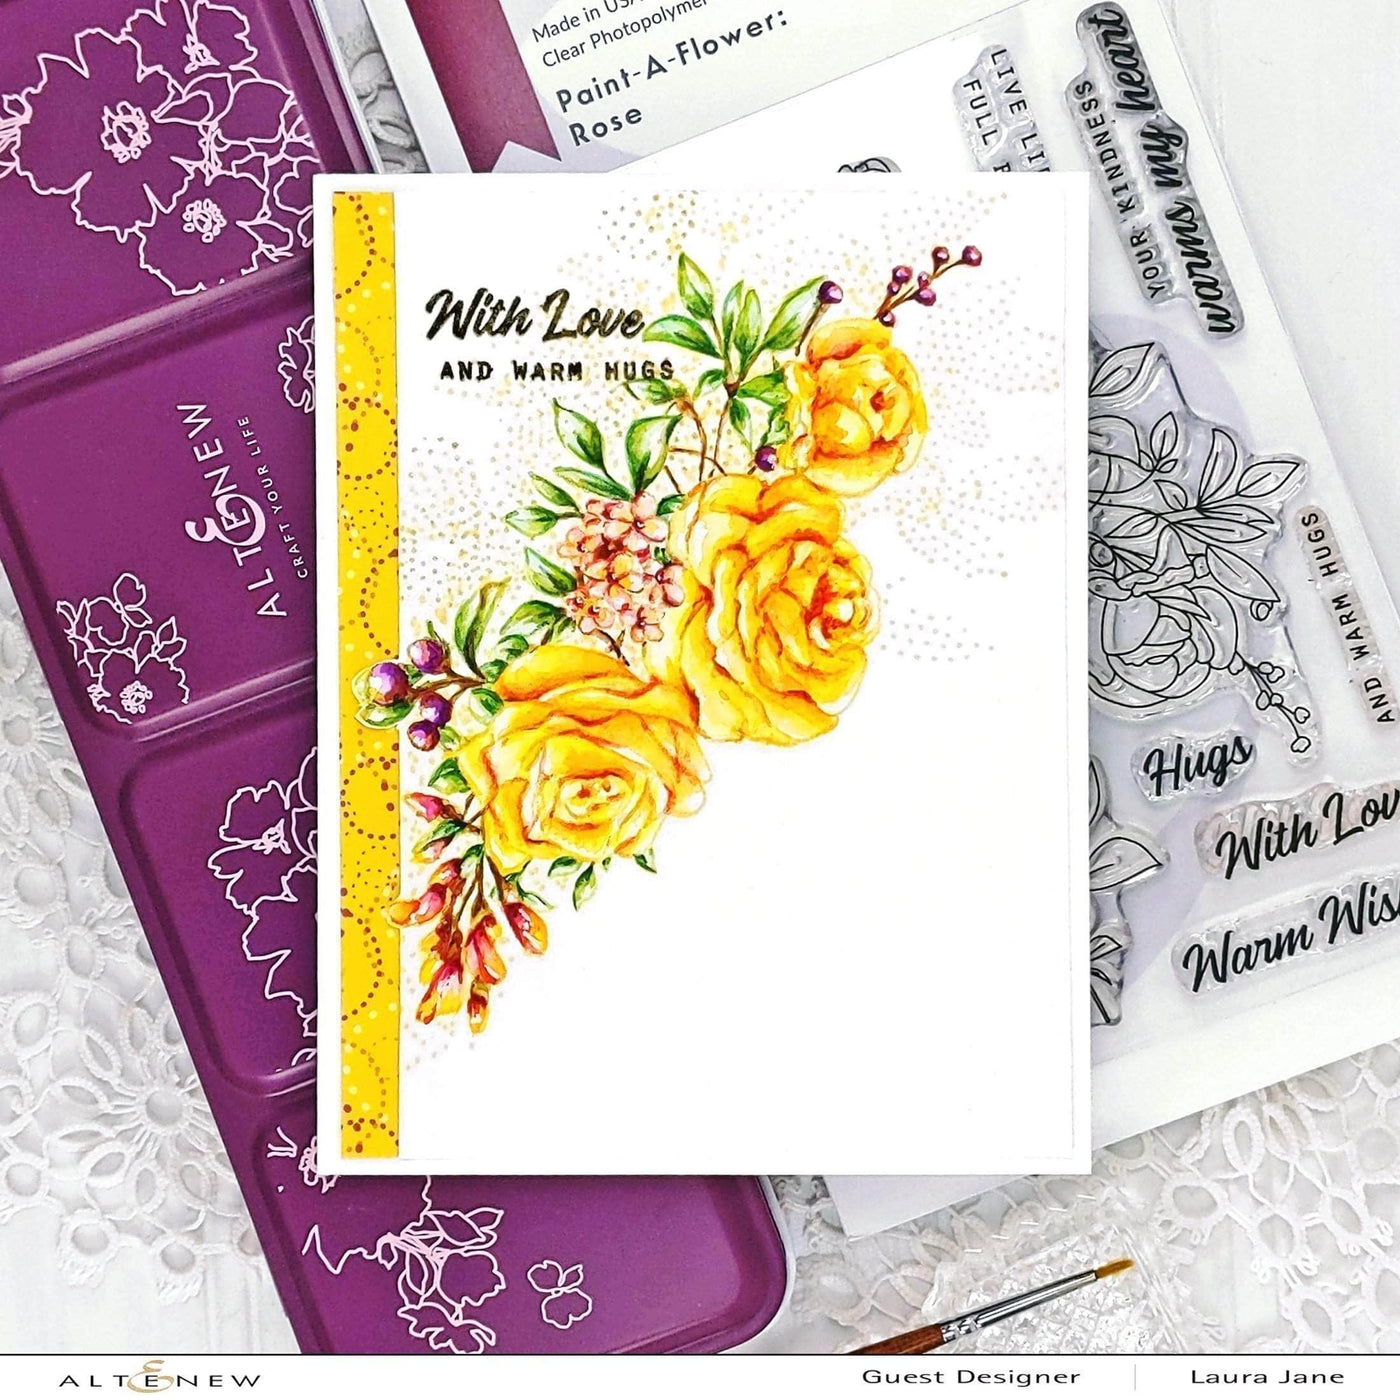 Clear Stamps Paint-A-Flower: Rose Outline Stamp Set